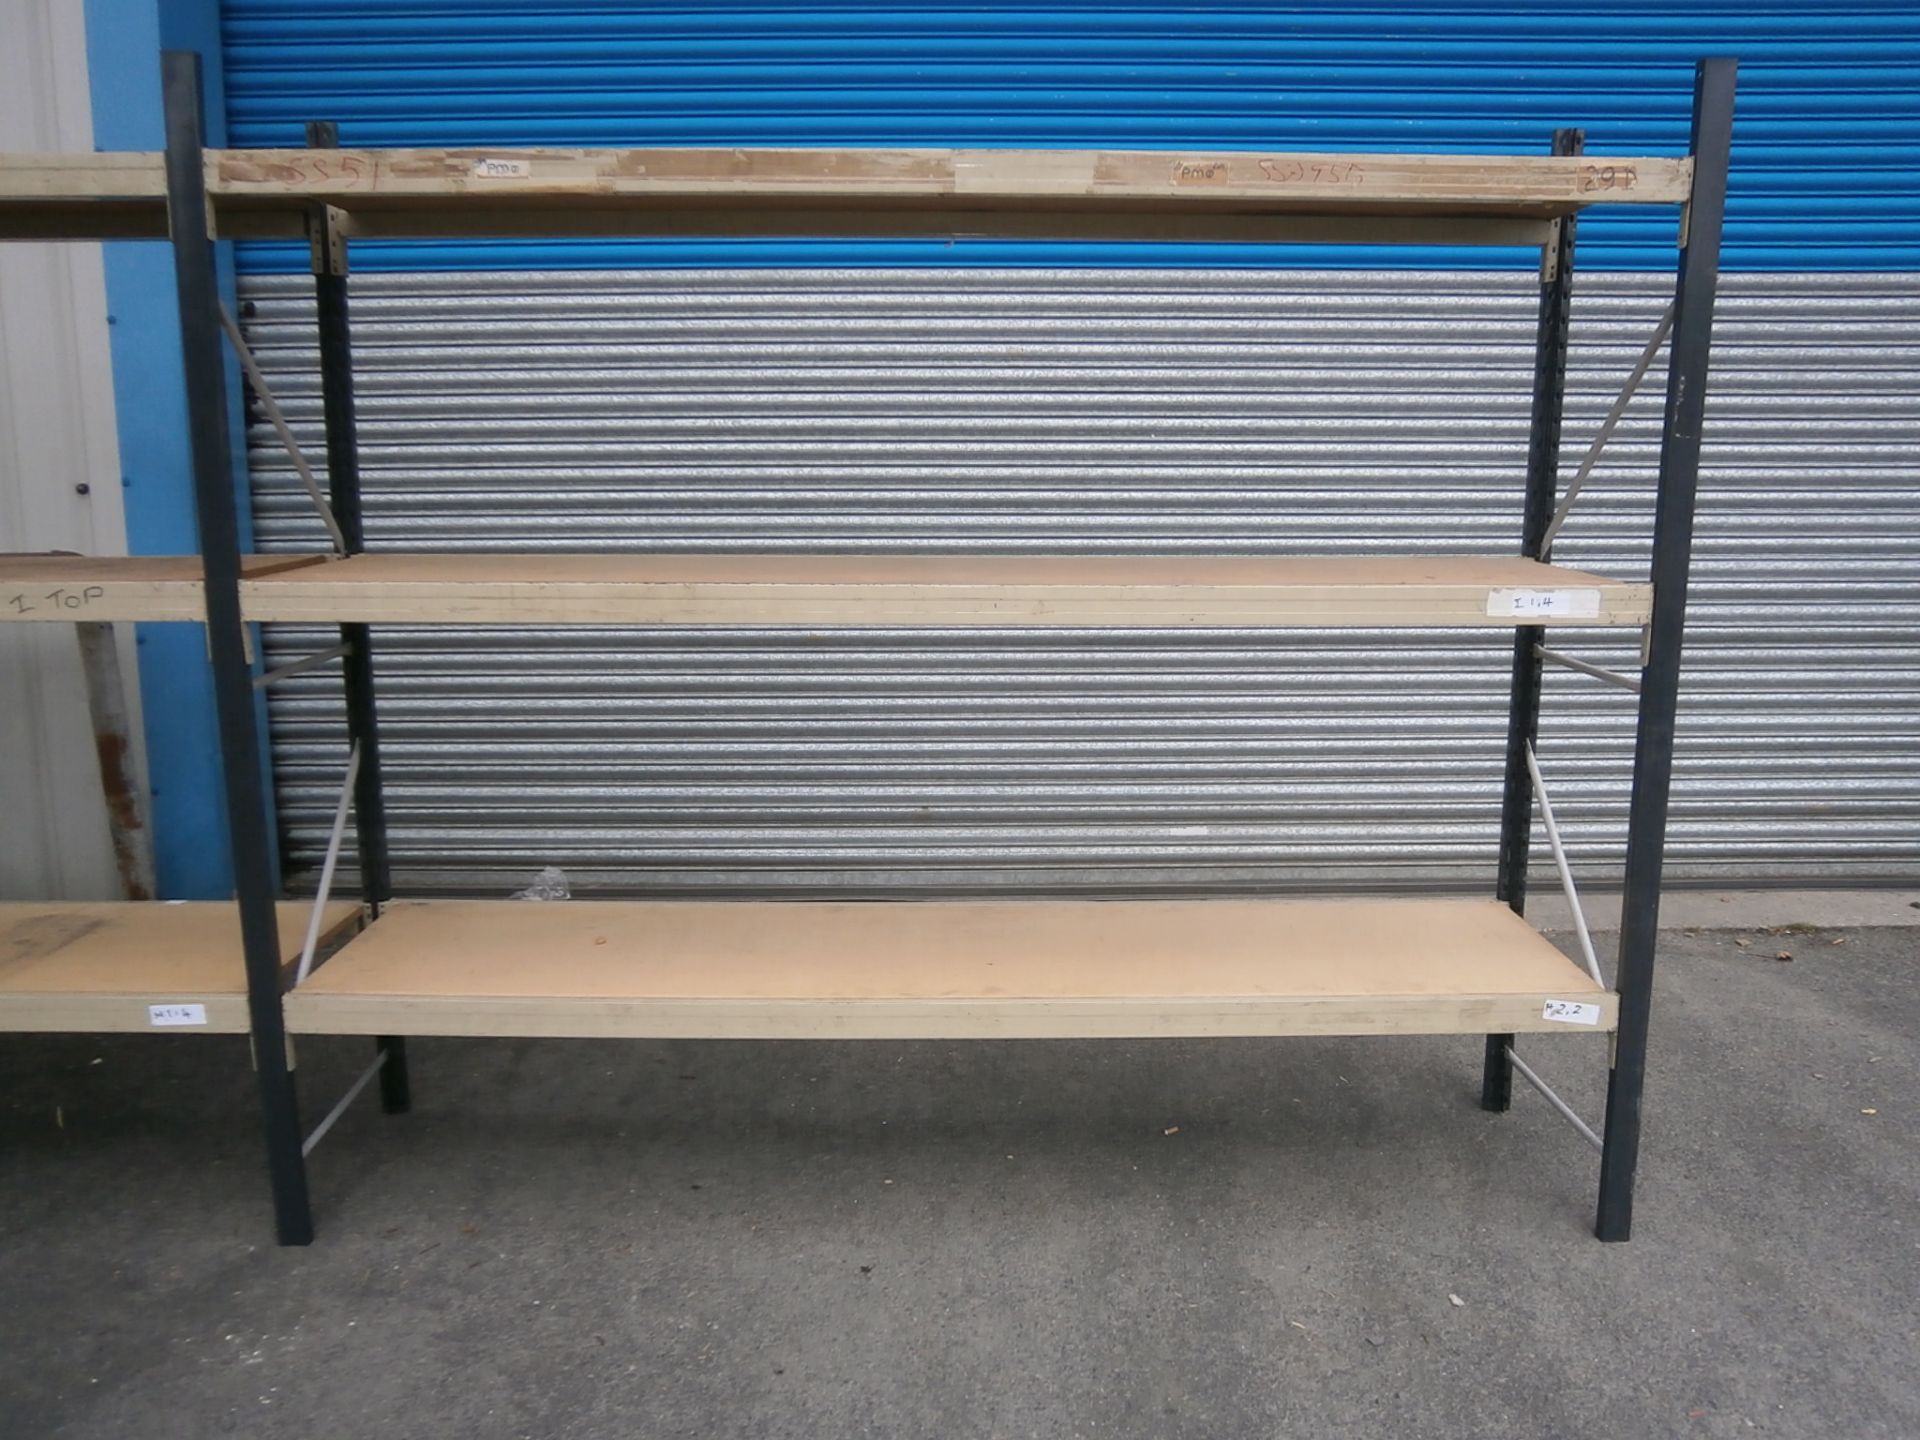 4 x Bays of Commercial Racking - Includes 5 x Uprights, 24 x Beams and 12 x Boards (H - 2100mm, - Image 4 of 4